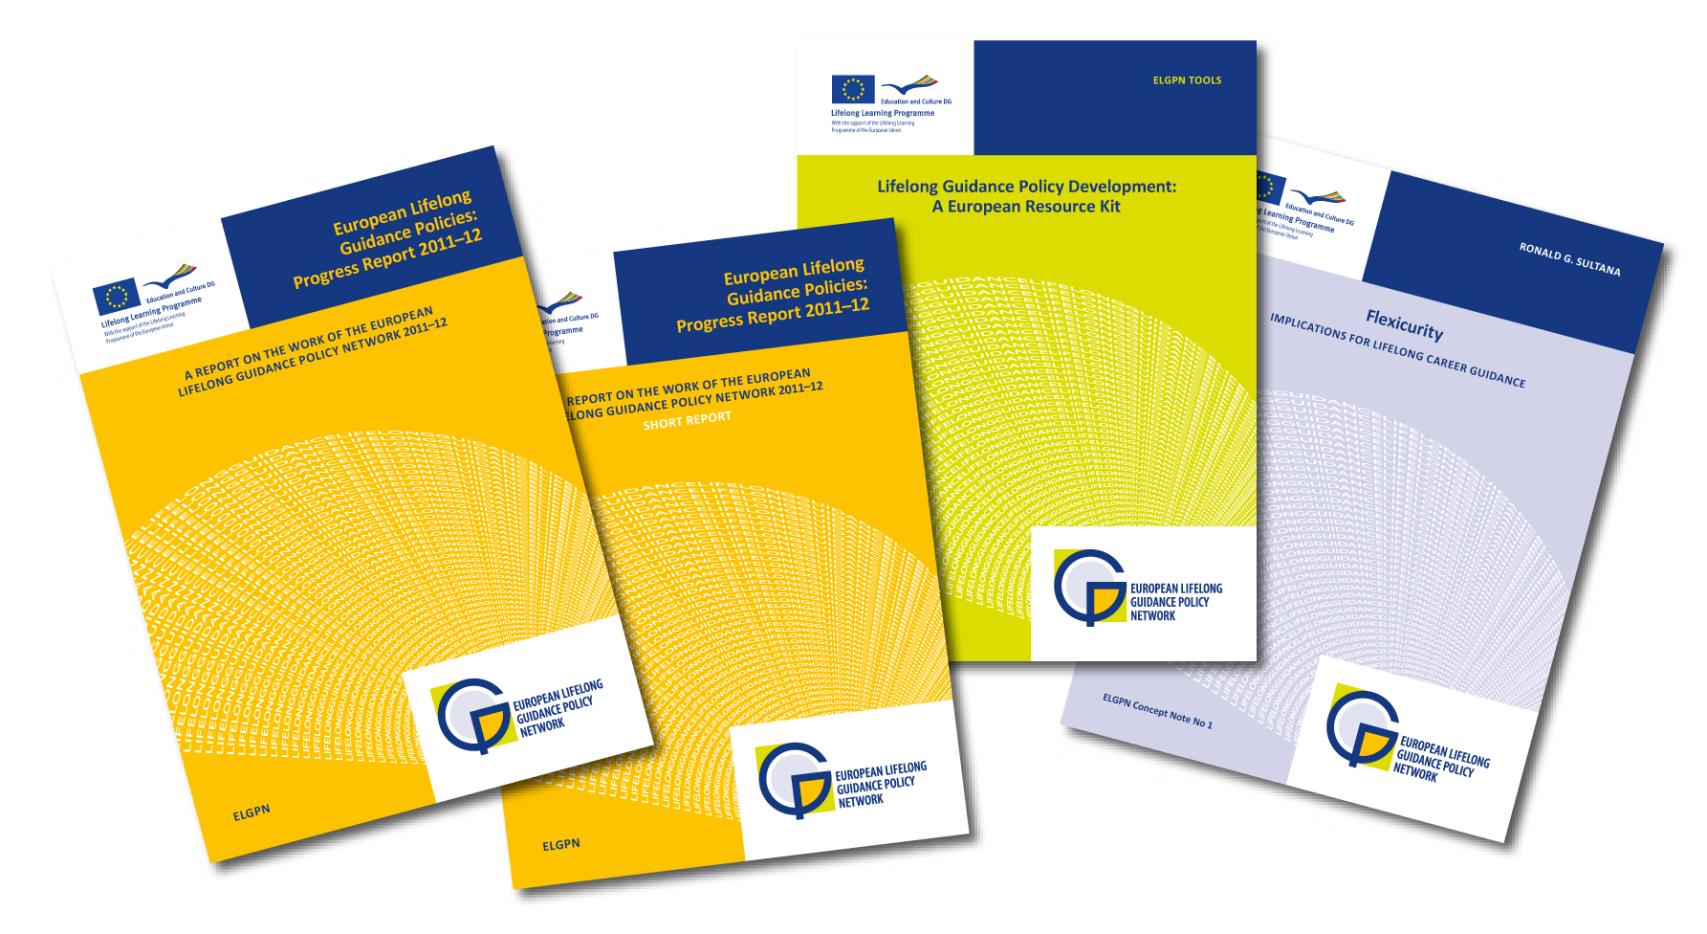 ELGPN tuotteet 2015 () - LLG Policy Development, European Resource Kit for Policy Makers - ELGPN Evidence Guide 2012 - ELGPN Progress Reports 2008-14 & Short Reports - Concept Notes (Flexicurity,